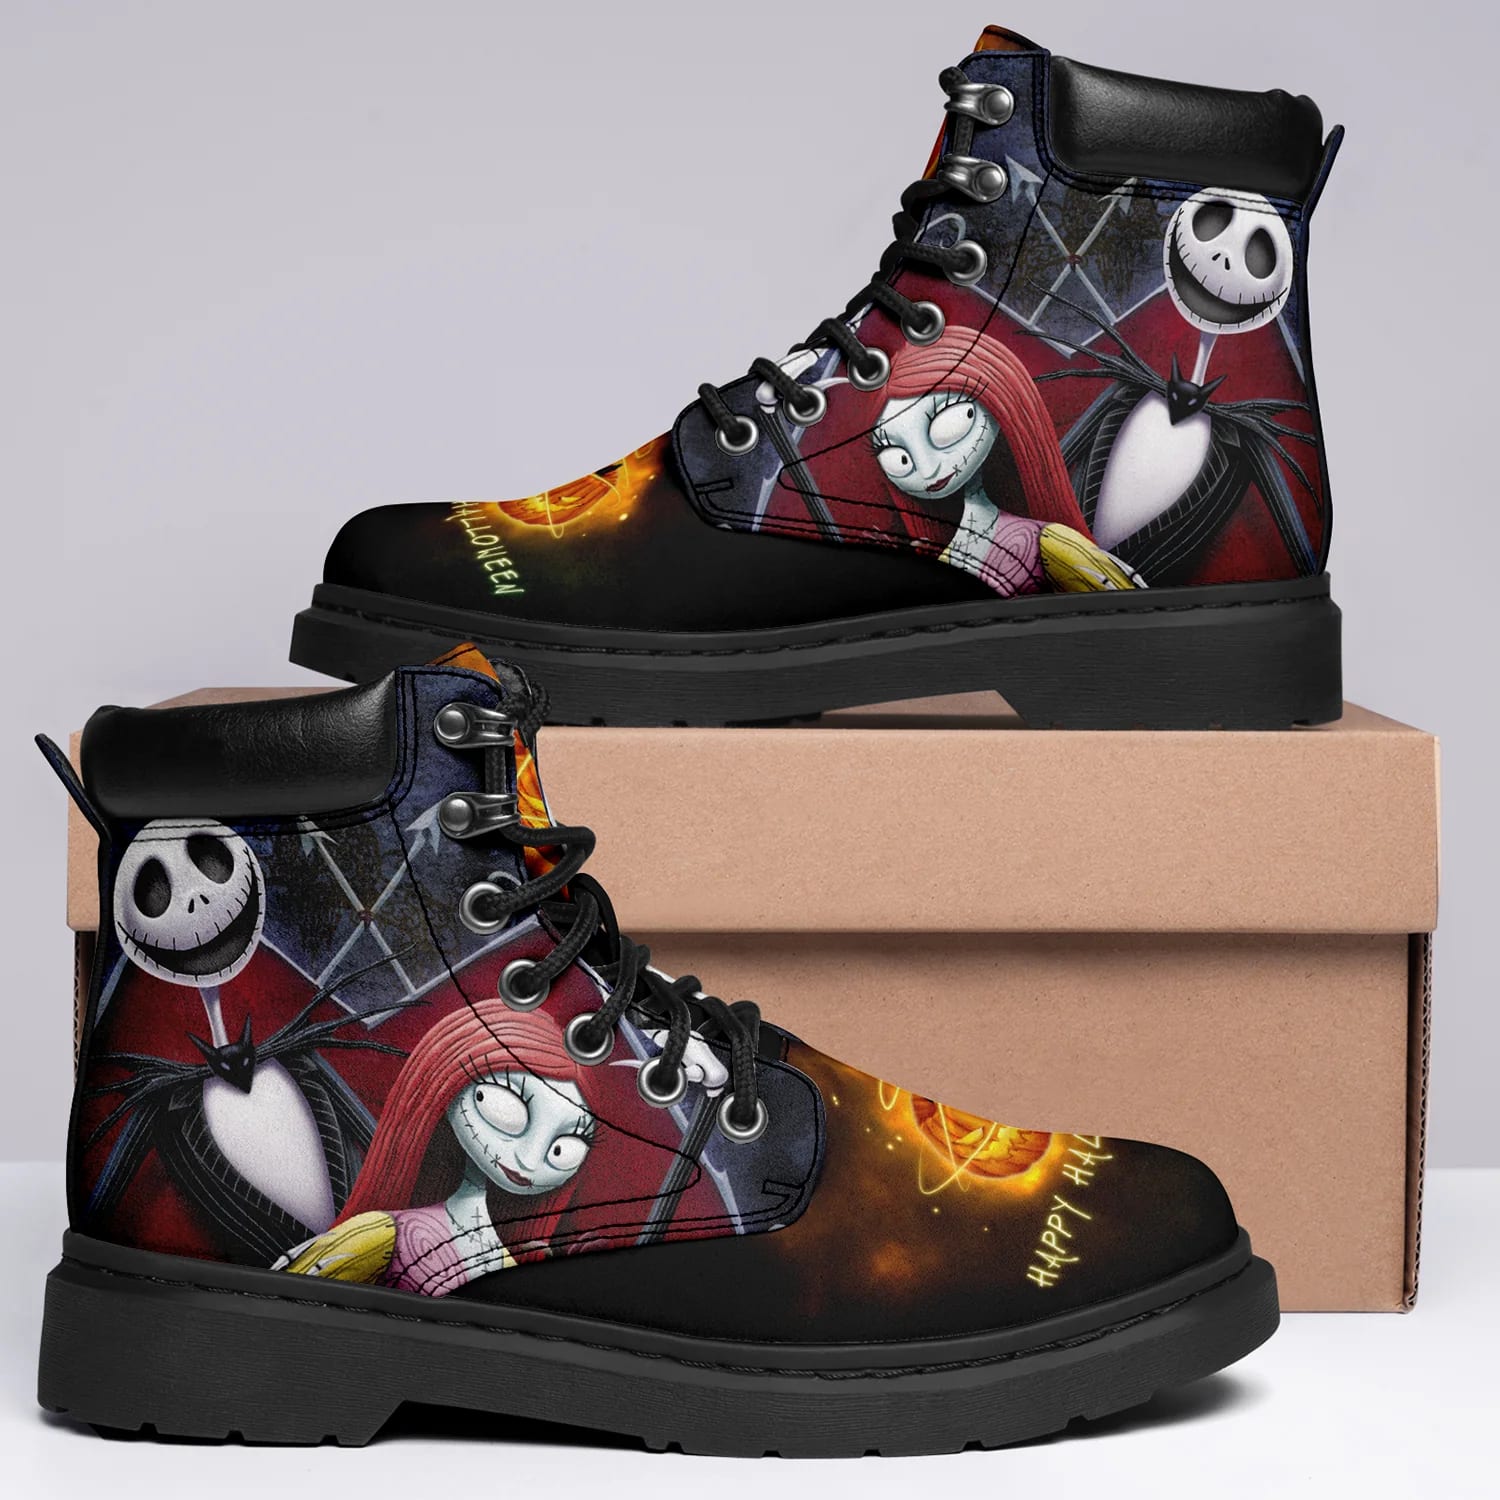 Funny Jack Skellington Sally Boost The Nightmare Before Christmas Shoes Pgqbcn